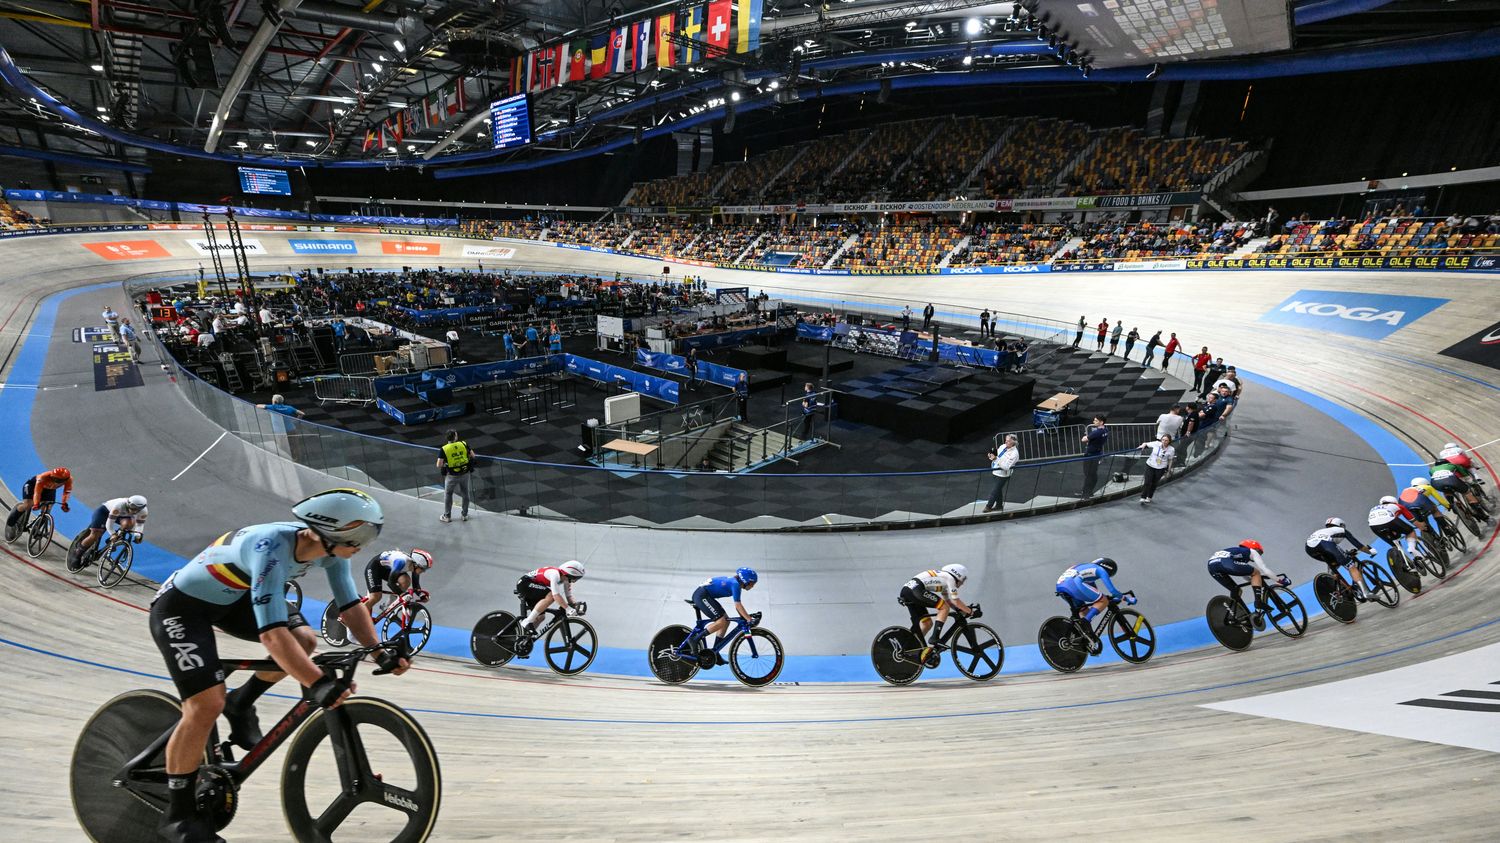 "Adrenaline of the audience, you have to know how to use it": at the European Championship in cycling on the track, the crazy soundscape puts the nerves of the "track riders" to the test